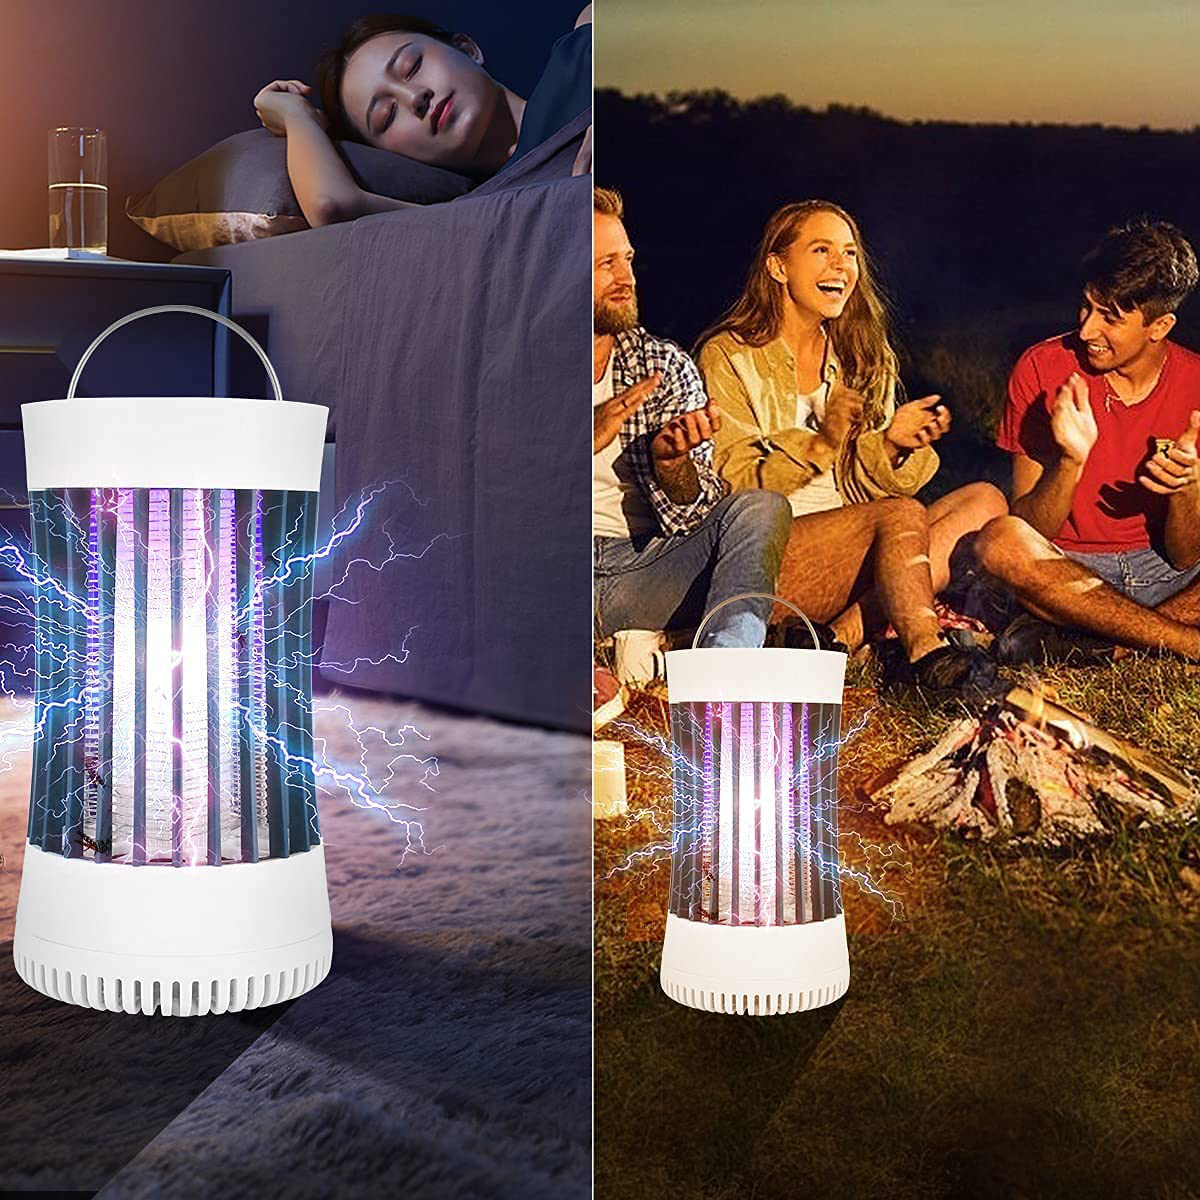 AICase Bug Zapper, USB Rechargeable Indoor & Outdoor Mosquito Killer Trap Lamp Light with 2000mah Battery, Suction Fan, Electric Portable Mosquito Fly Zapper for Home, Camping, Gnats, Backyard, Patio